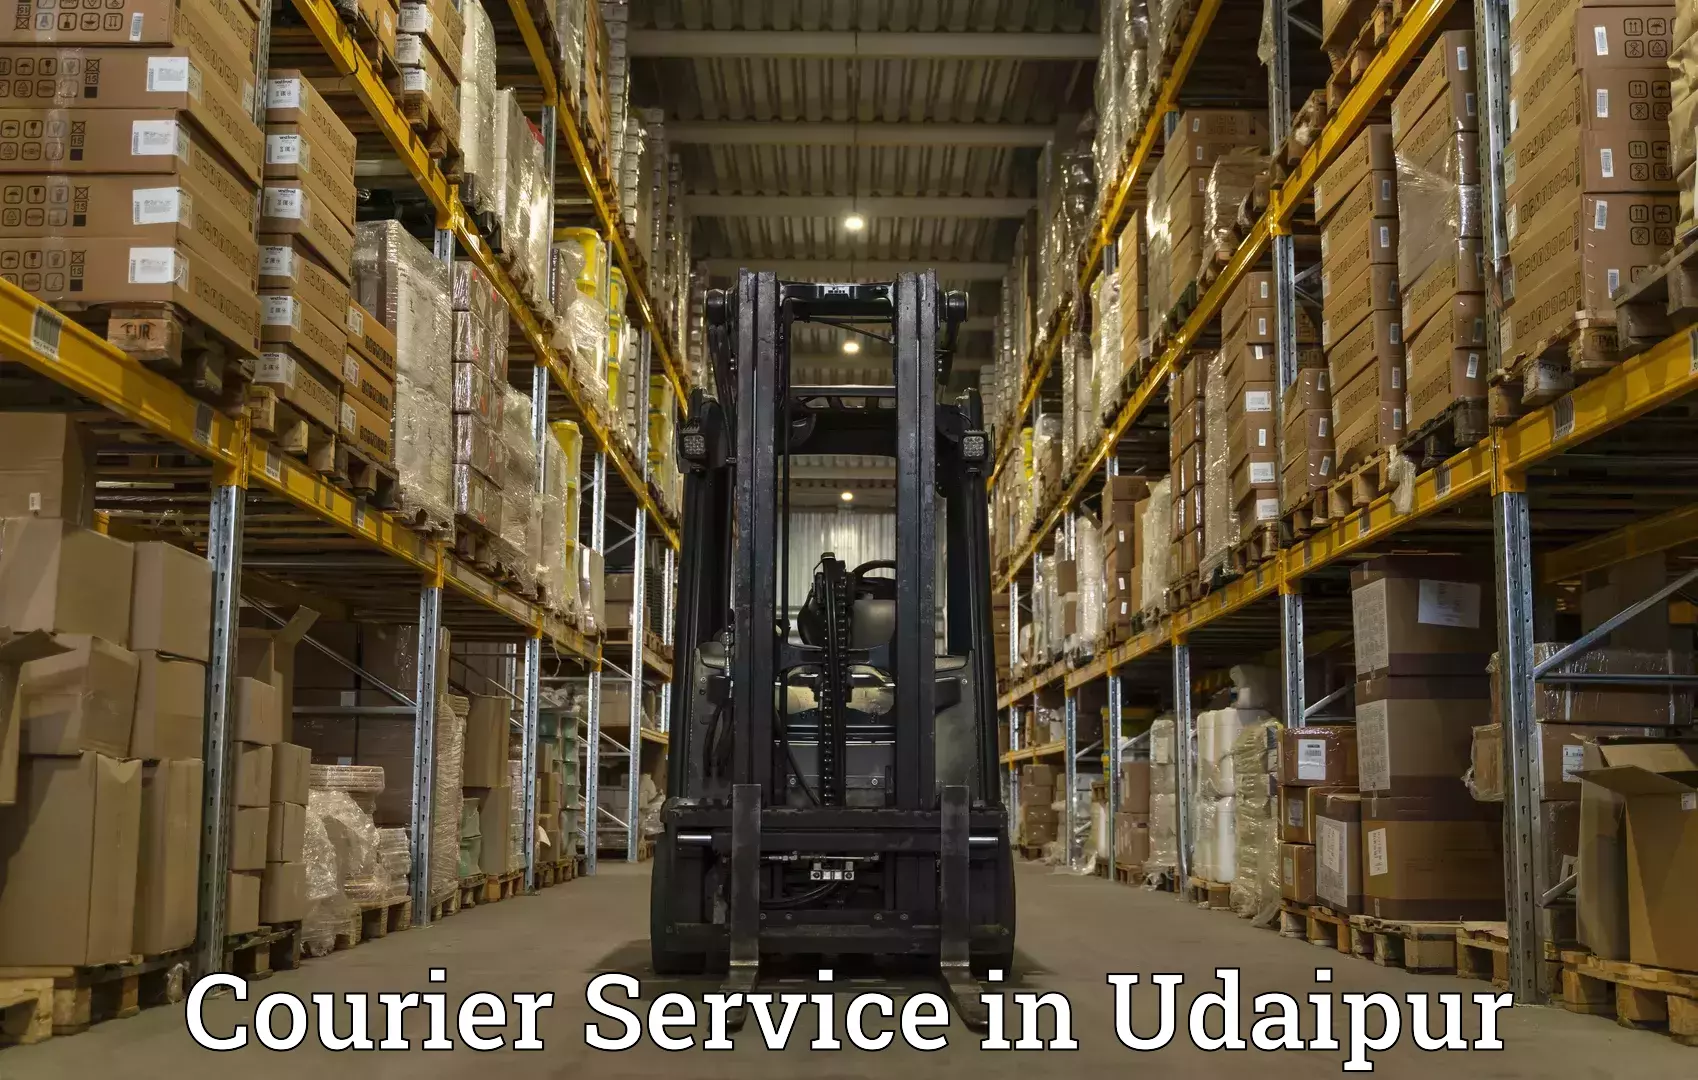 Multi-national courier services in Udaipur